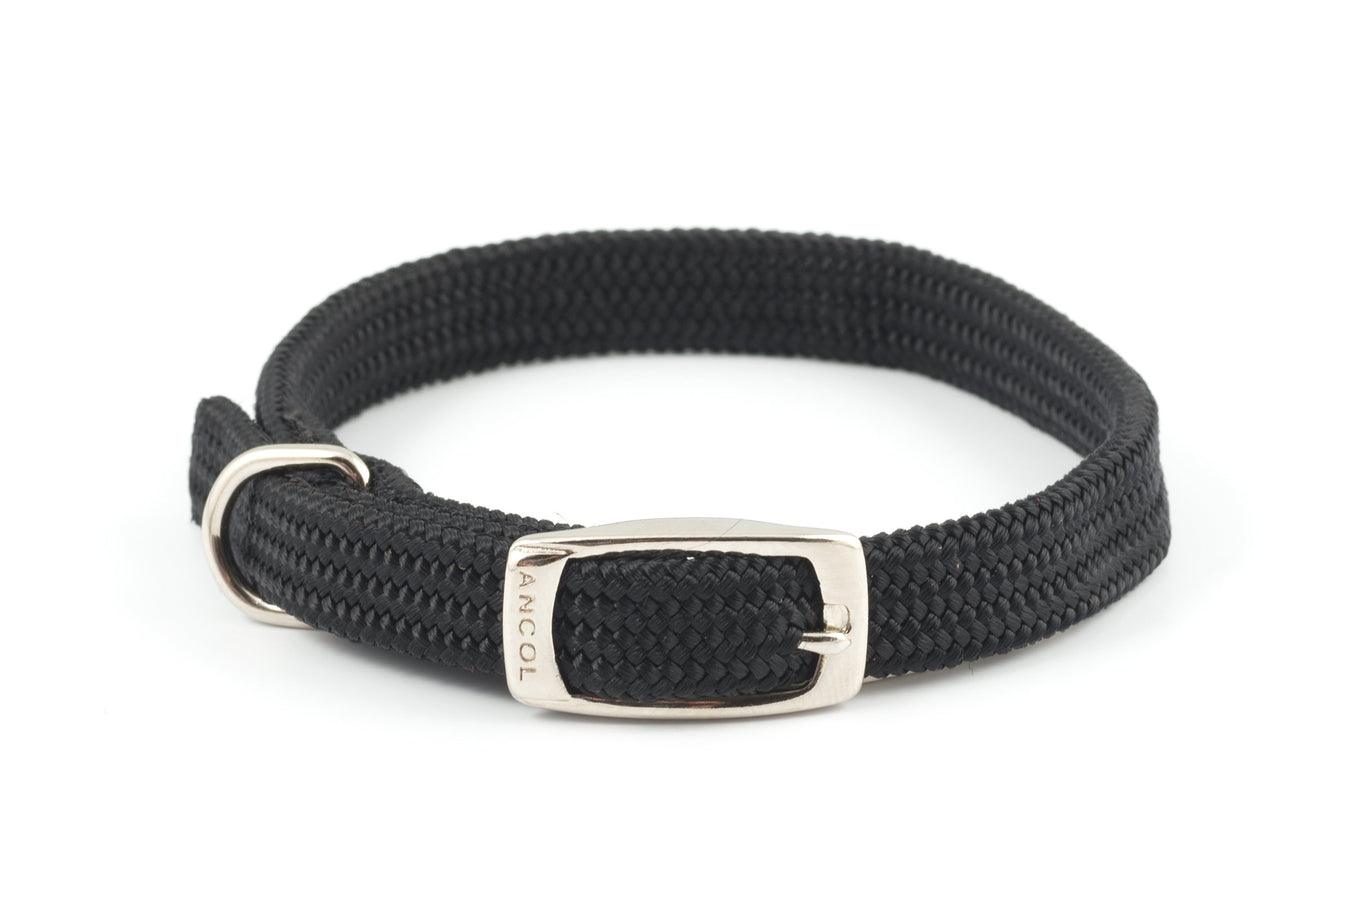 Collars, Leads & Harnesses for Dogs